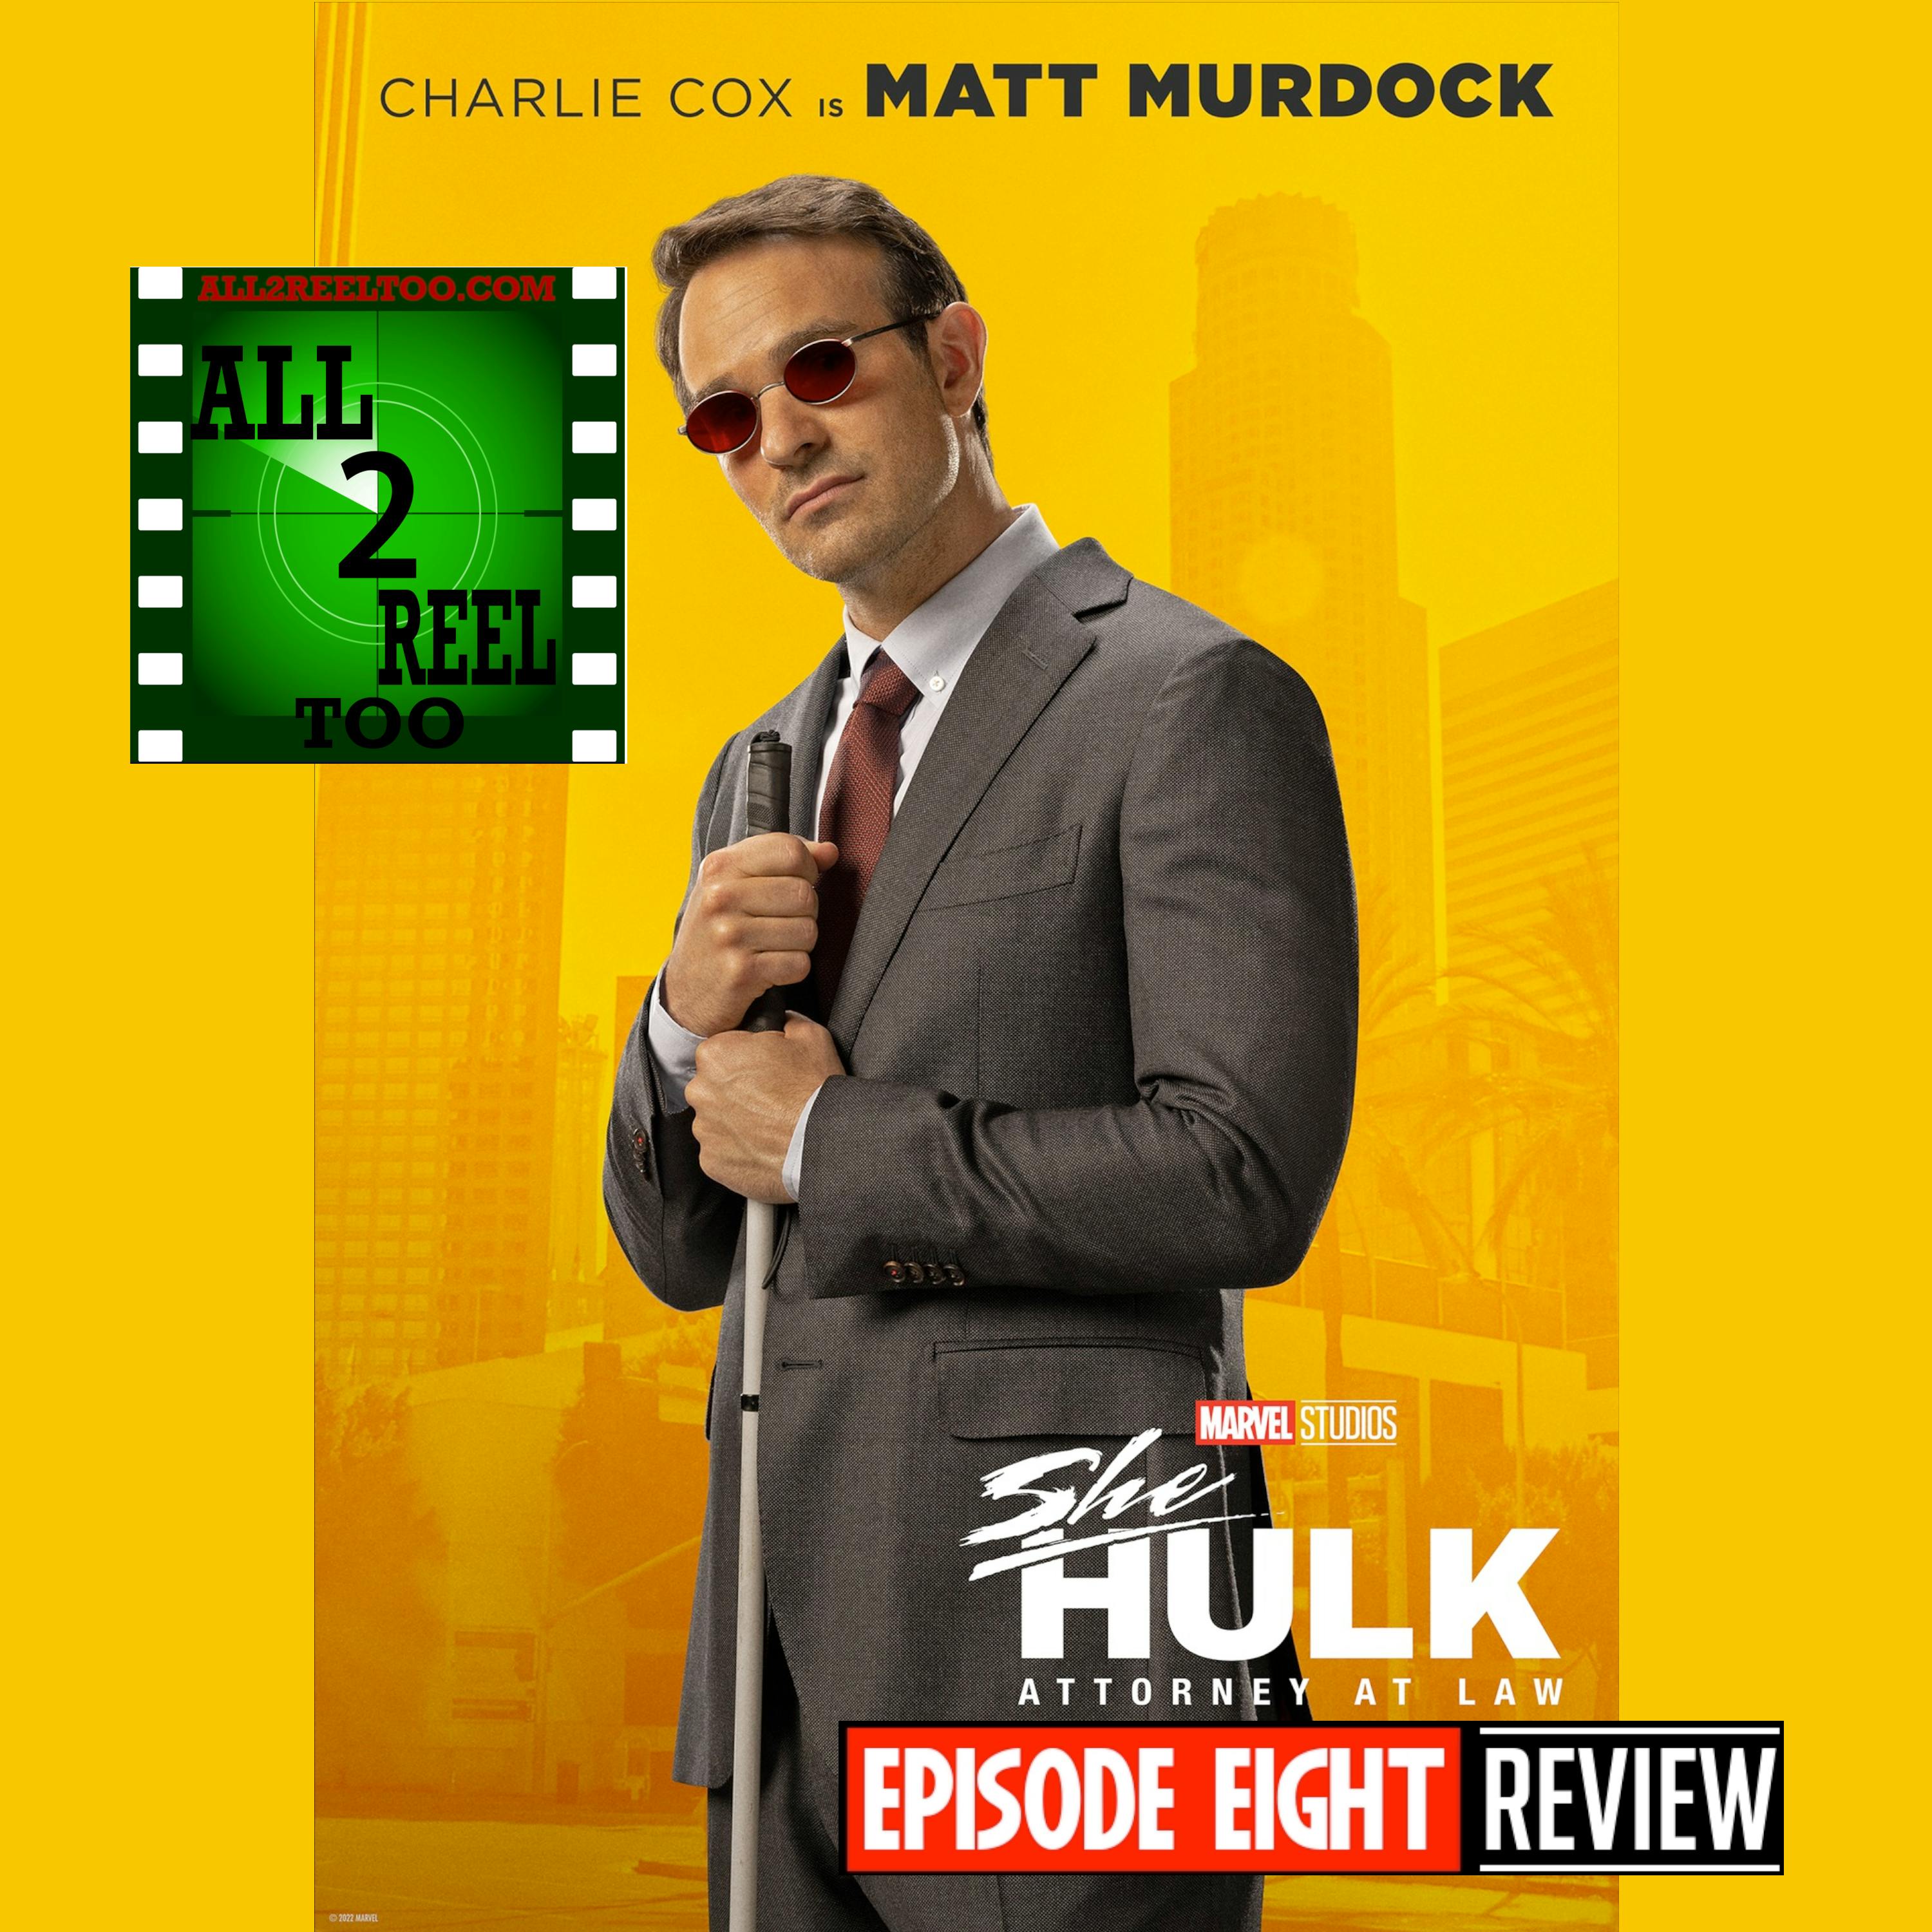 She-Hulk: Attorney at Law - EPISODE 8 REVIEW Image